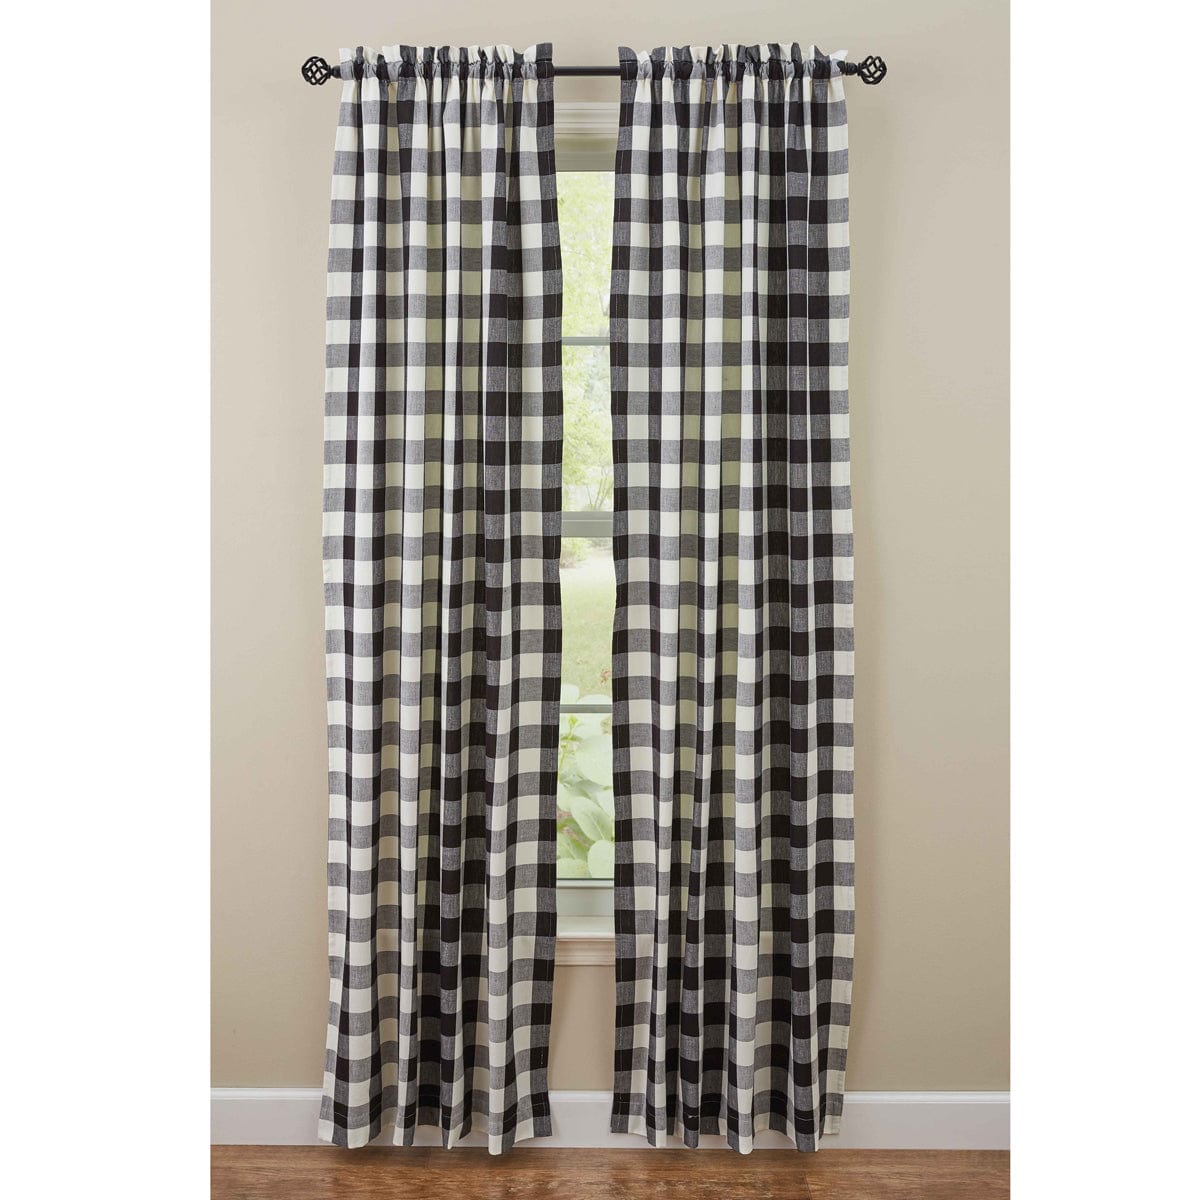 Wicklow Check in Black &amp; Cream Panel Pair With Tie Backs 84&quot; Long Lined-Park Designs-The Village Merchant